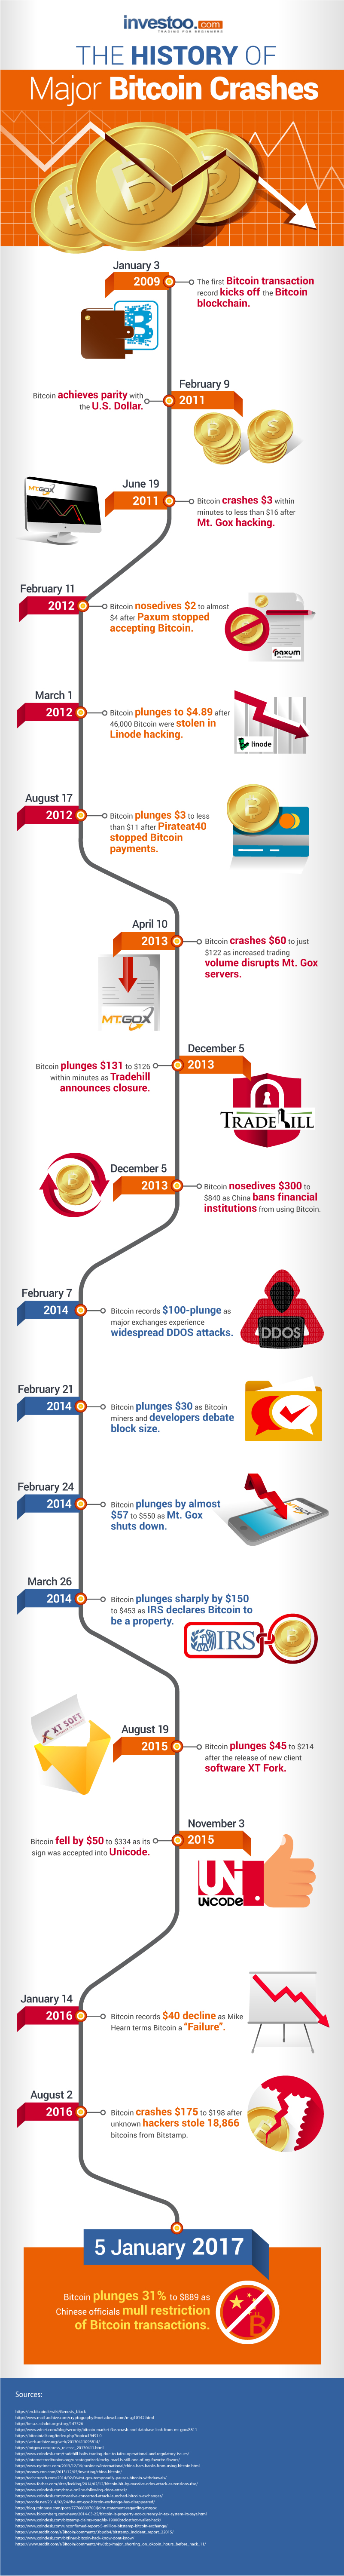 Infographic: History of Bitcoin Crashes